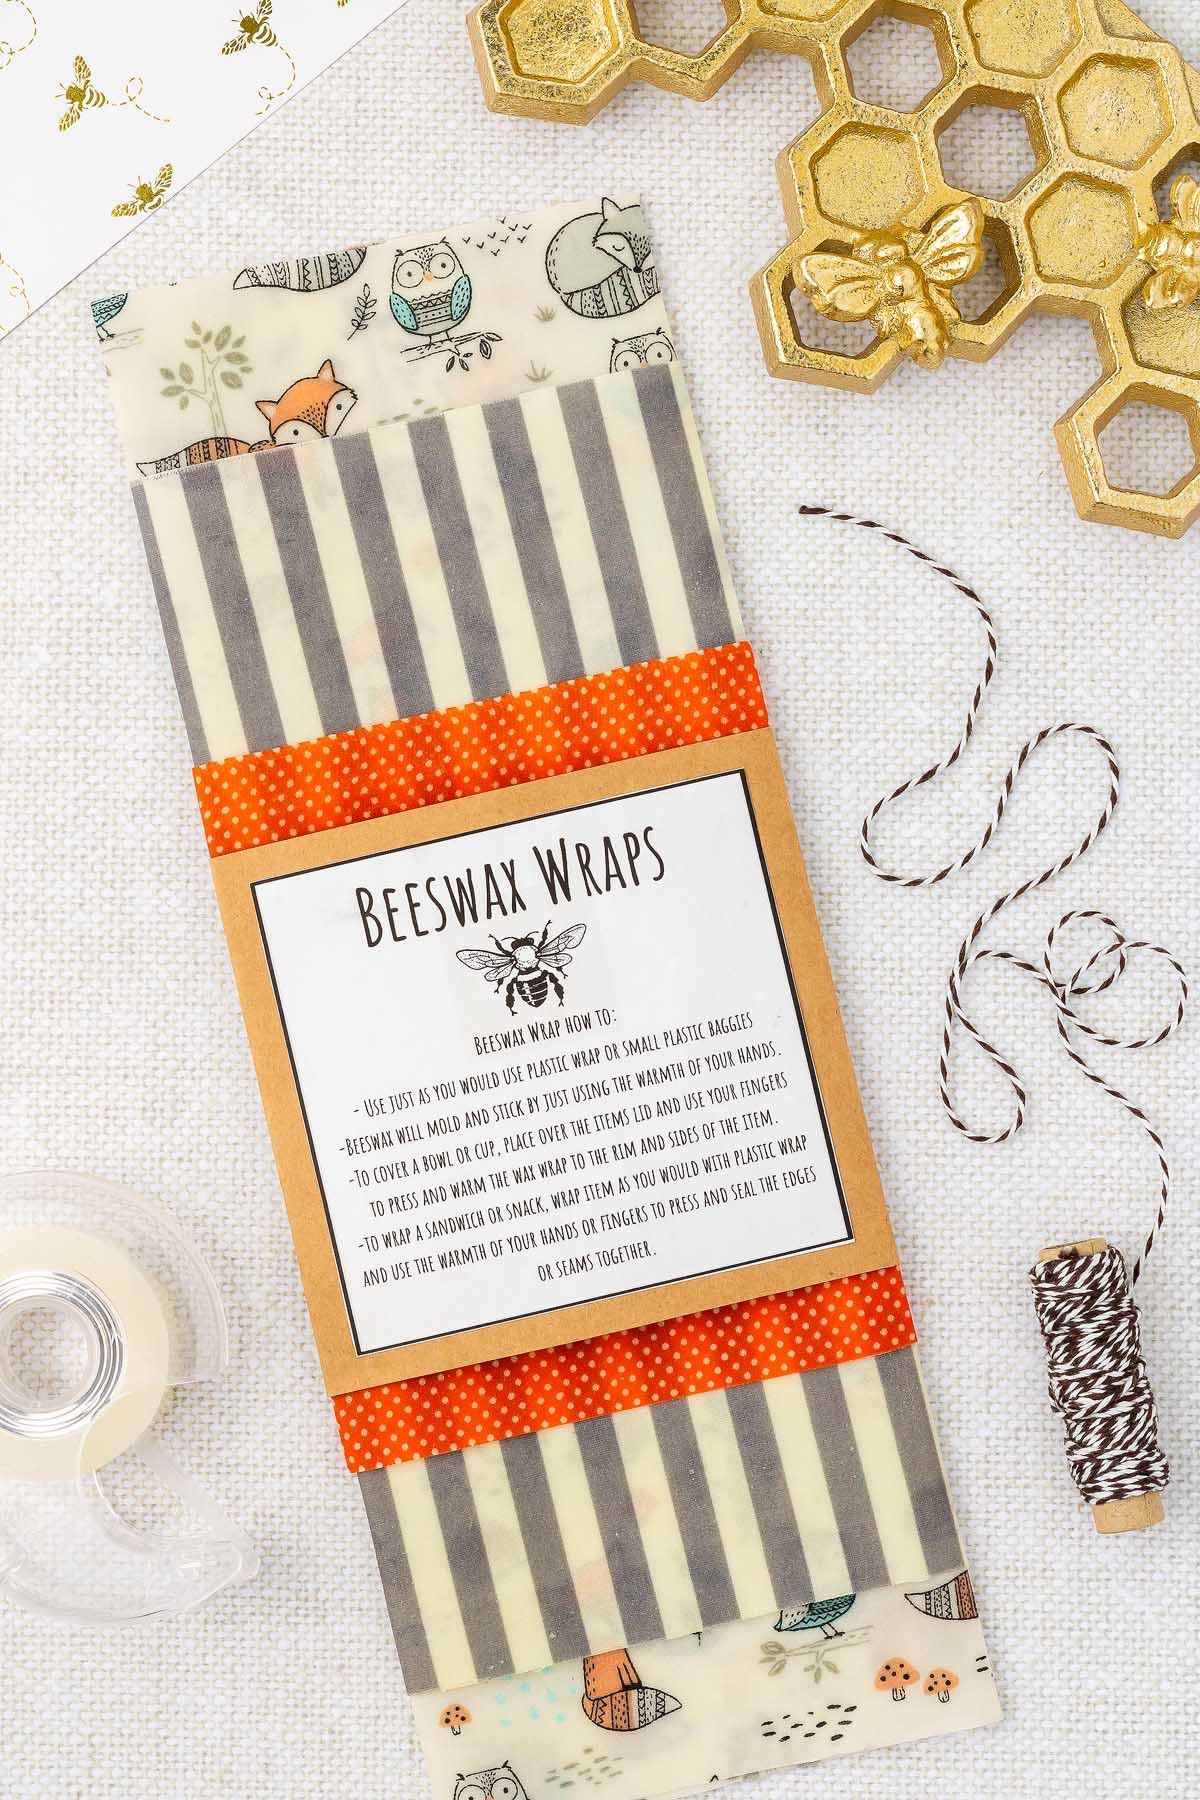 Standard Sizes for Homemade Beeswax Wraps